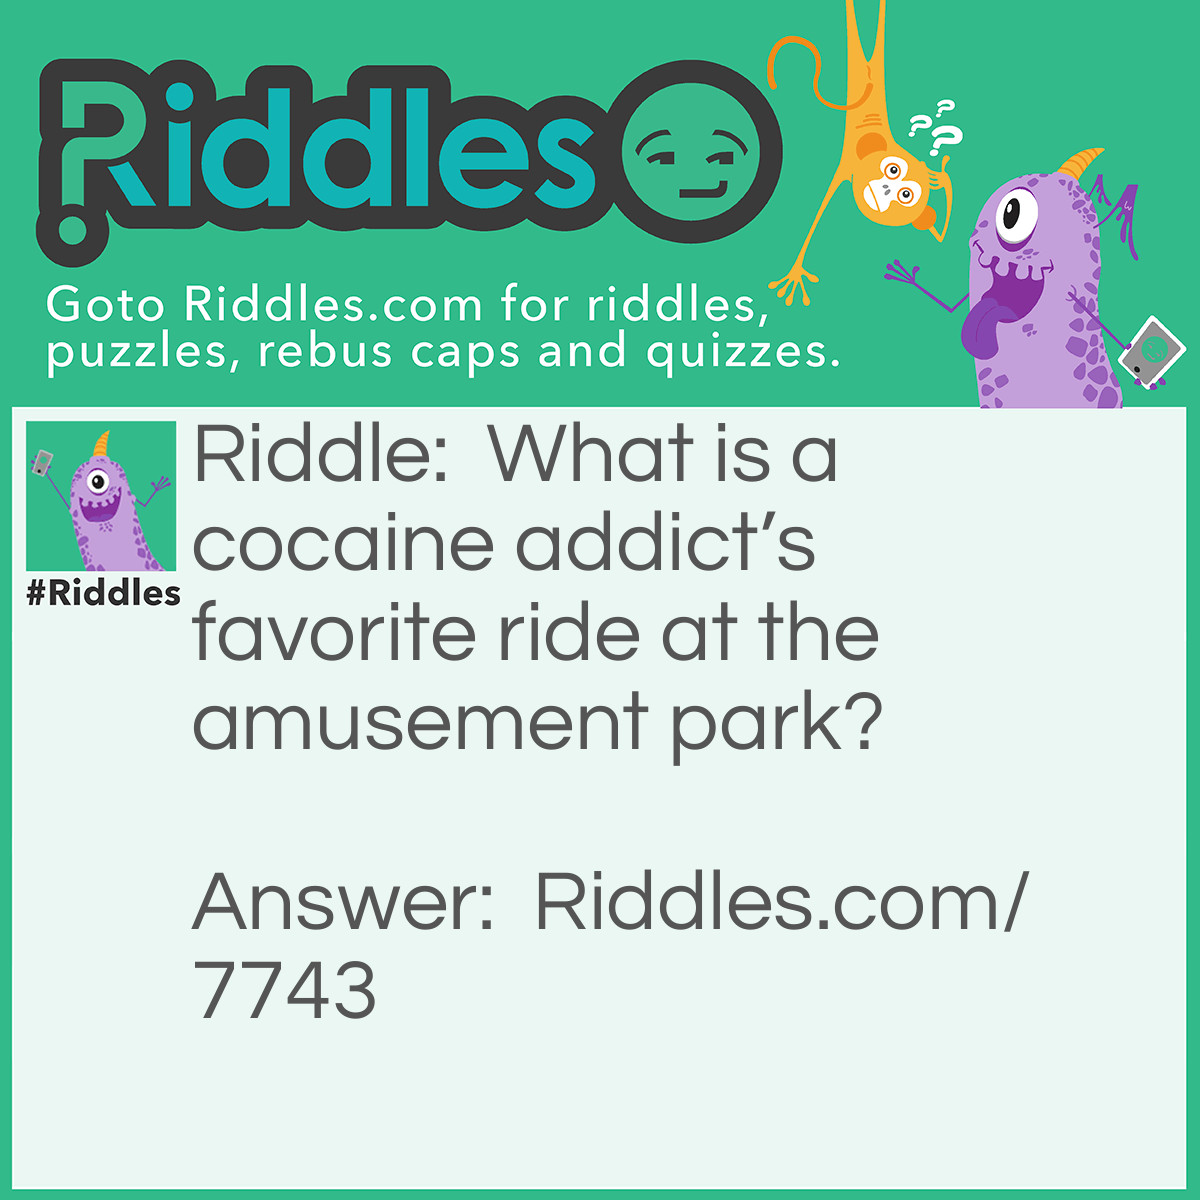 Riddle: What is a cocaine addict's favorite ride at the amusement park? Answer: Bumper cars!